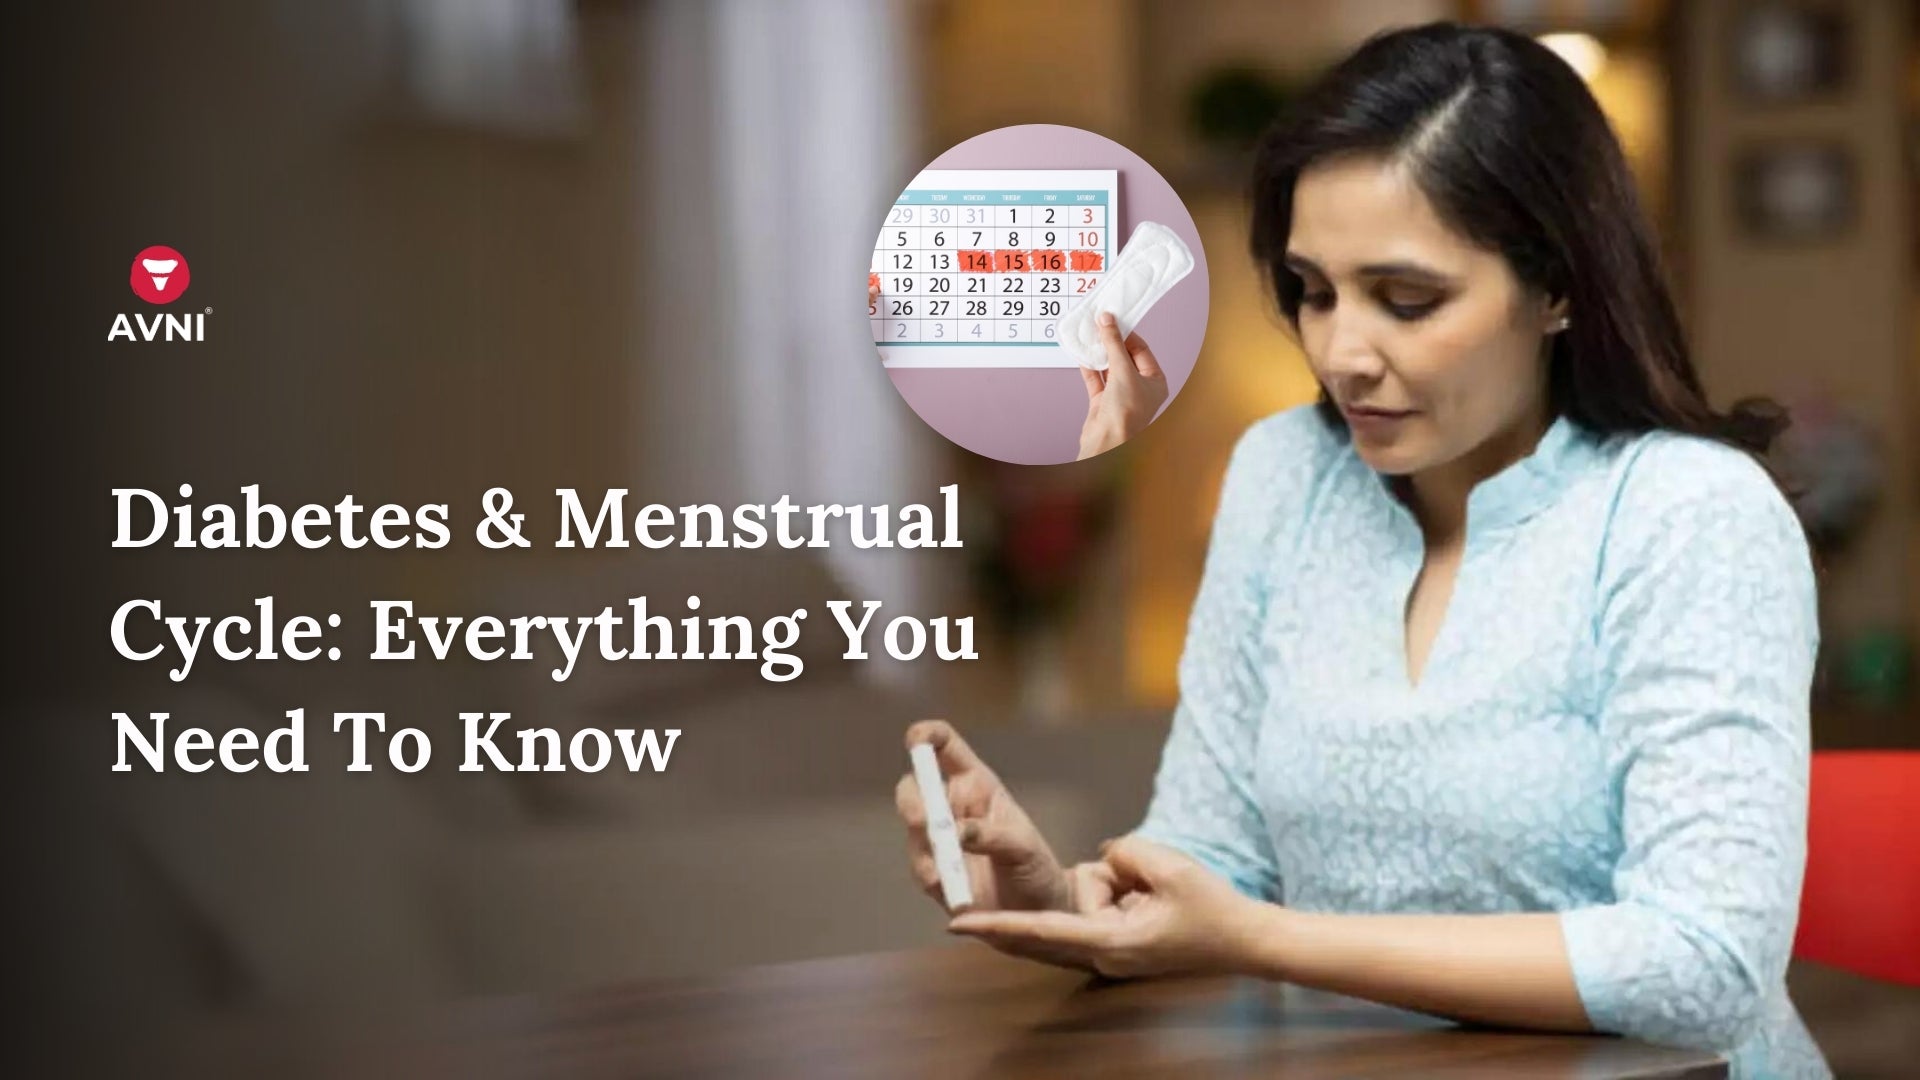 Diabetes & Menstrual Cycle: Everything You Need To Know